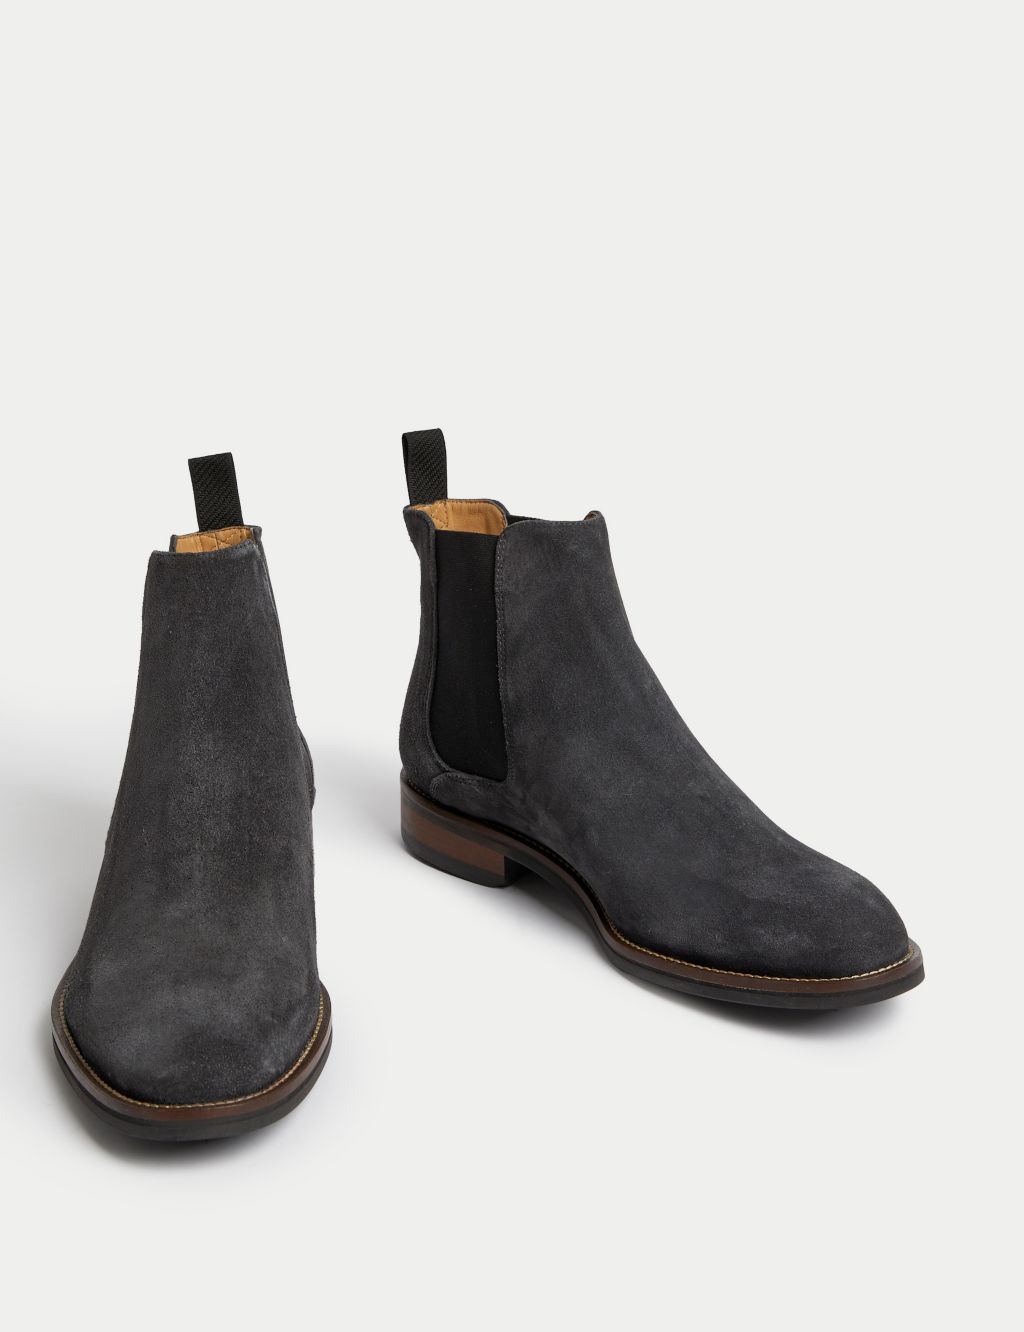 Suede Pull-On Chelsea Boots image 2